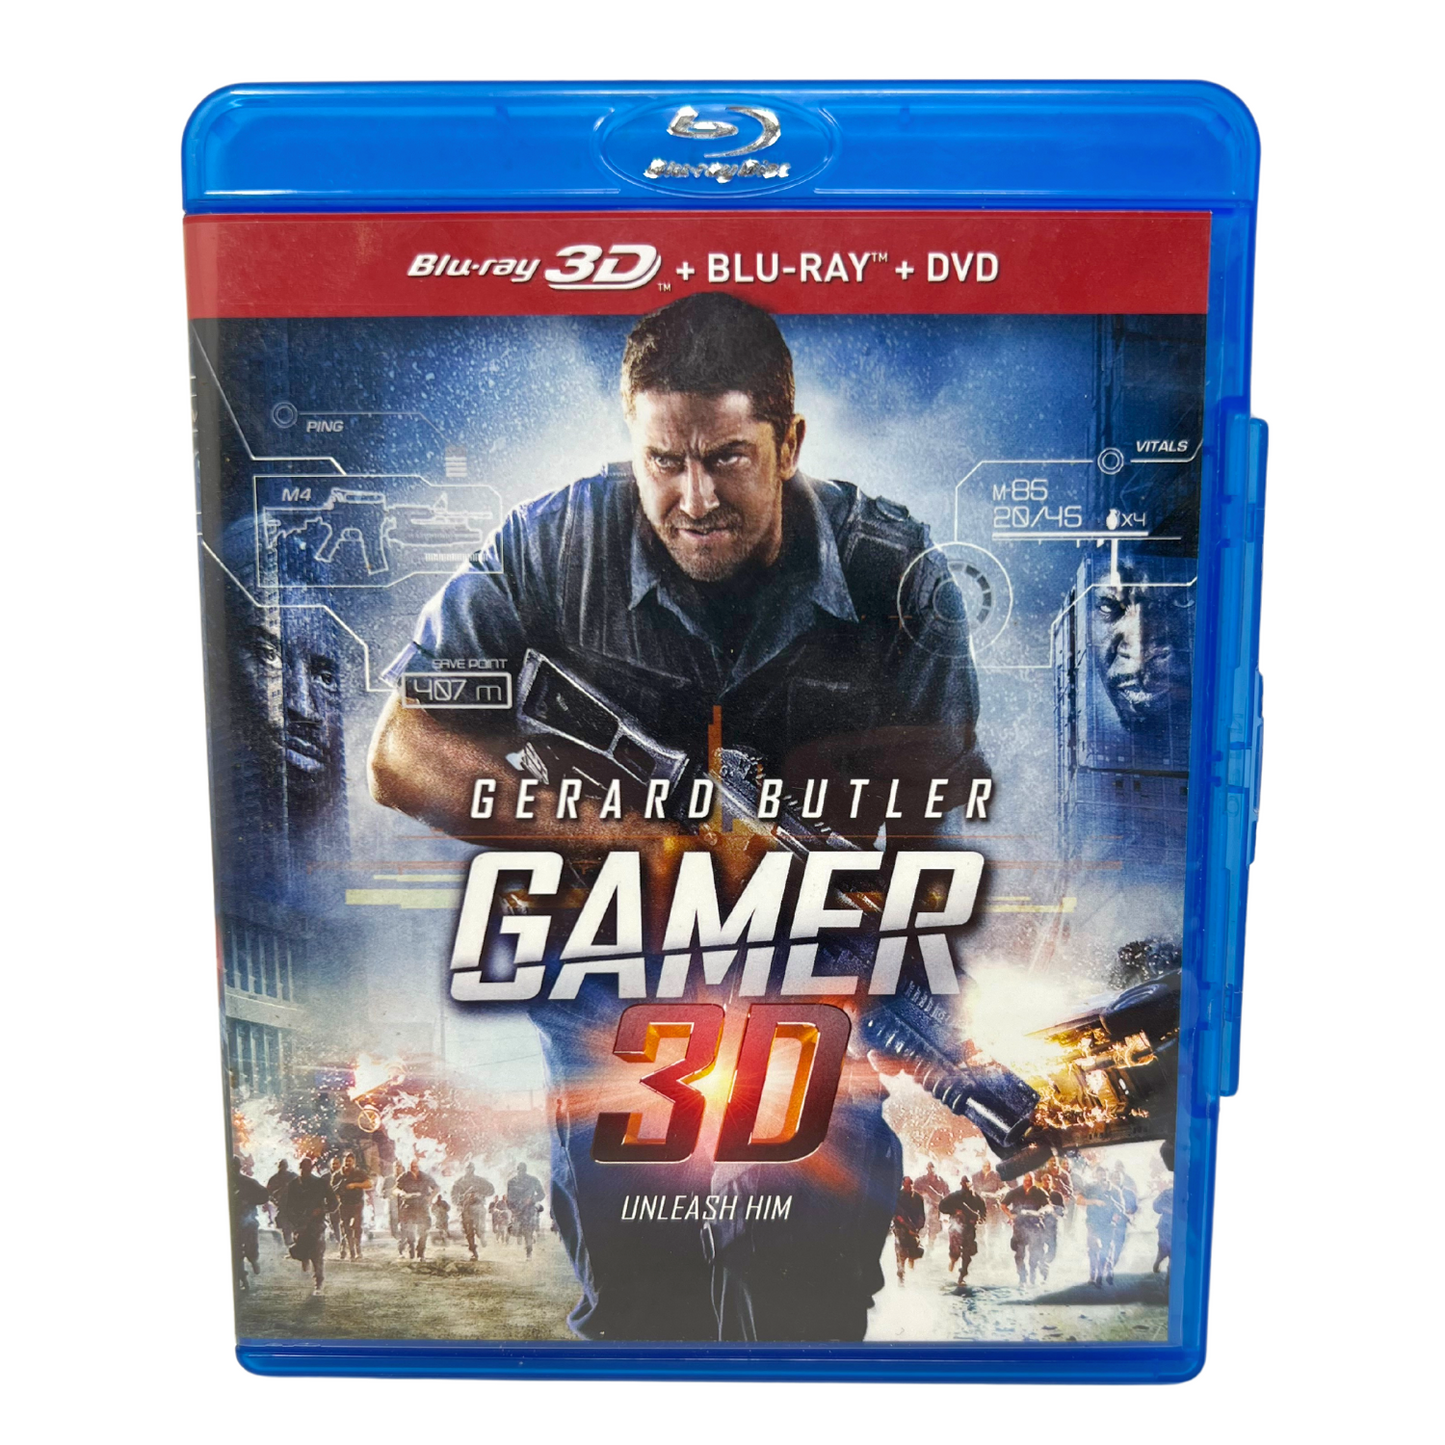 Gamer (Blu-ray 3D) Action Good Condition!!!